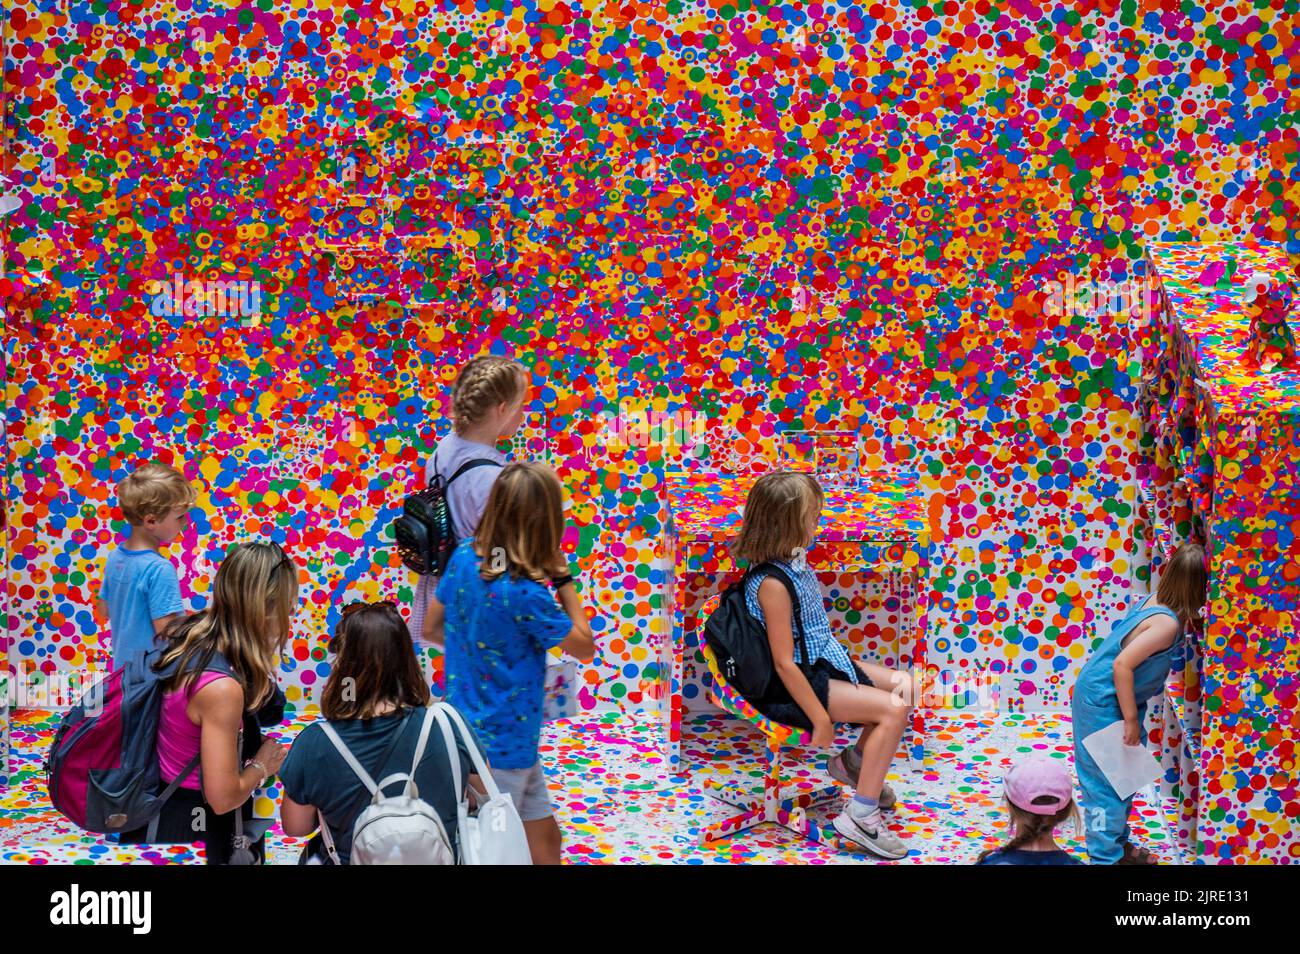 London, UK. 23rd Aug, 2022. The last chance this week to take part in the UNIQLO Tate Play: The obliteration room by Yayoi Kusama, where visitors transform a completely white domestic apartment into a sea of colourful dots. Visitors are given a sheet of colourful ‘dot' stickers to help bring the space to life in the Turbine Hall. Credit: Guy Bell/Alamy Live News Stock Photo